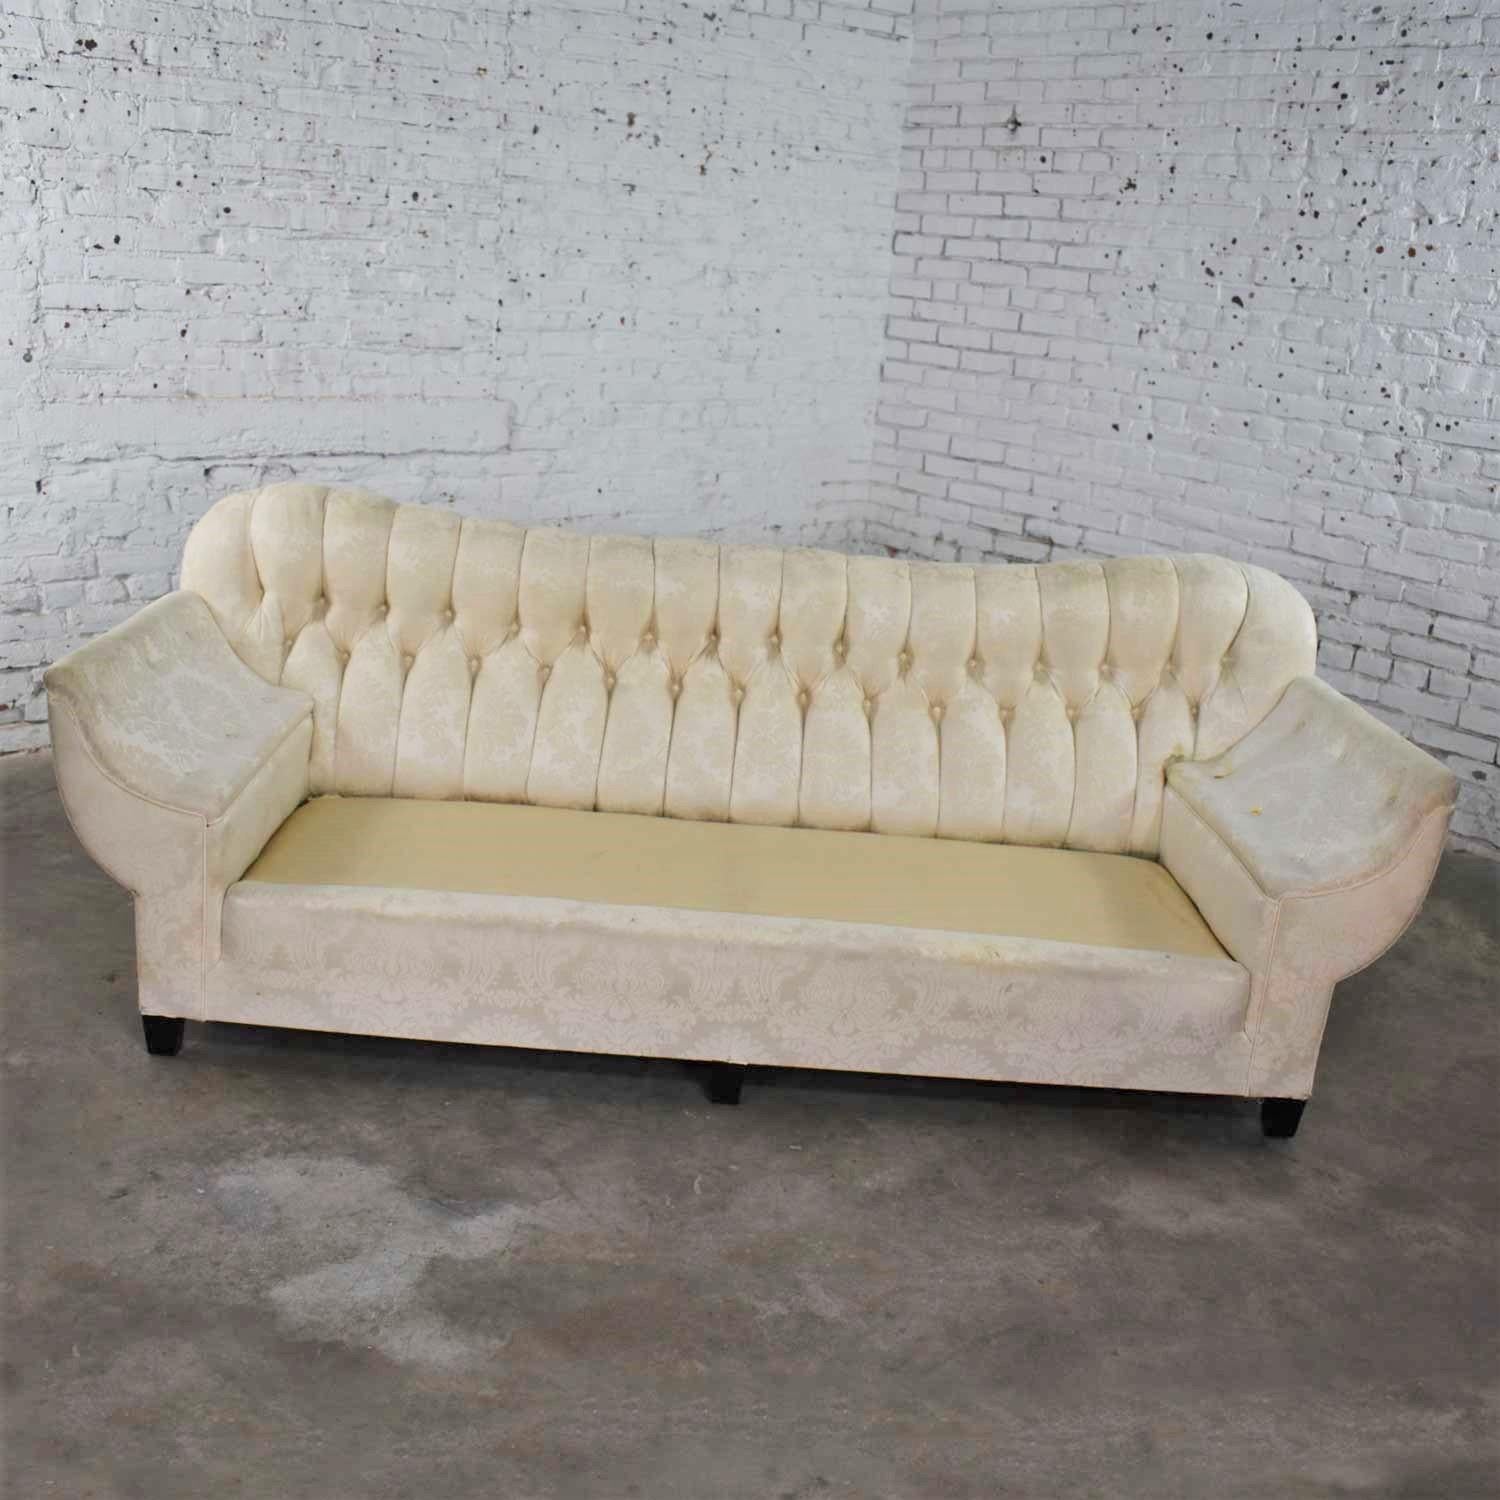 Vintage Art Deco Hollywood Regency Sofa Tufted Back and Concave Pillowed Arms For Sale 12